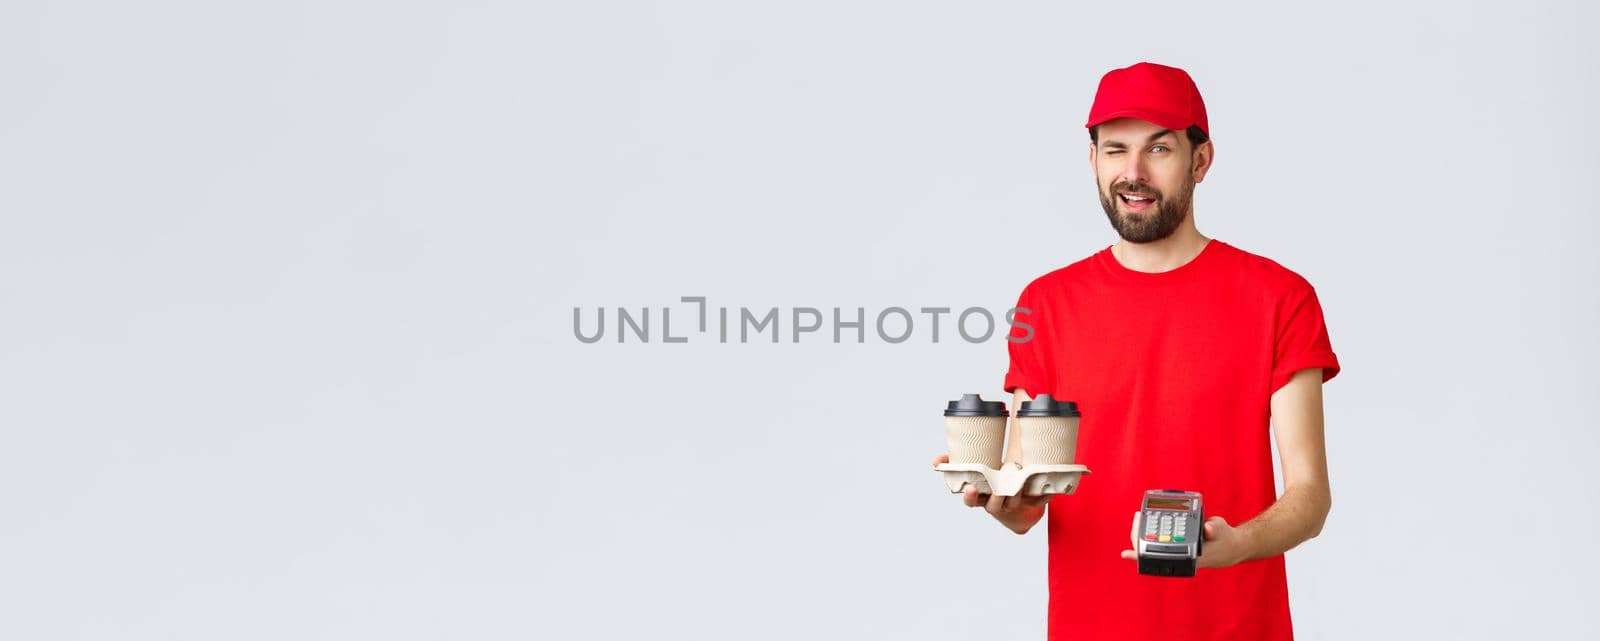 Food delivery, quarantine, stay home and order online concept. Cheeky courier in red uniform cap and t-shirt, wink to client as handing POS terminal and coffee deliver to pay contactless.